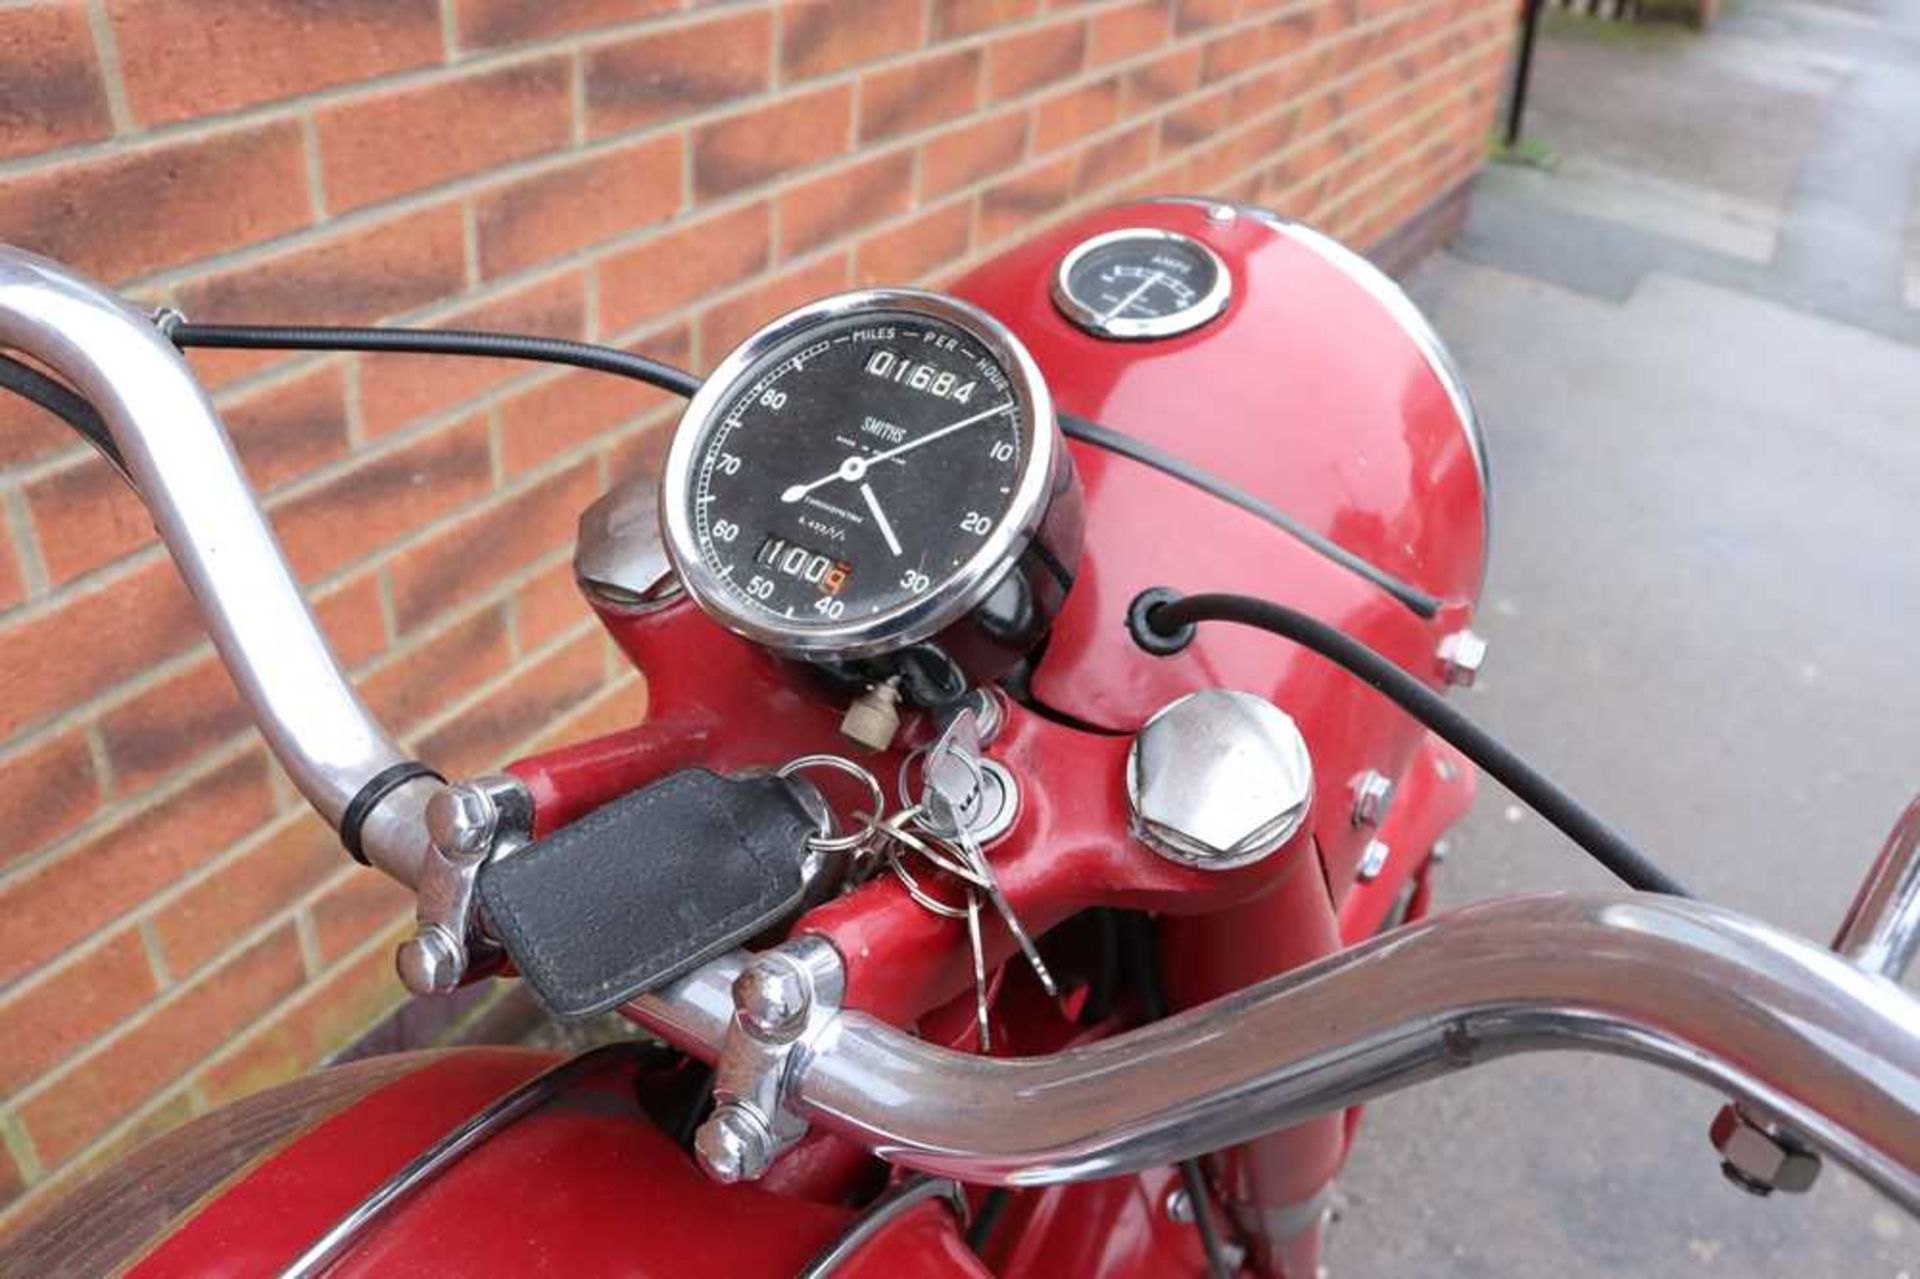 1956 BSA C12 Stainless steel rims and spokes - Image 19 of 44